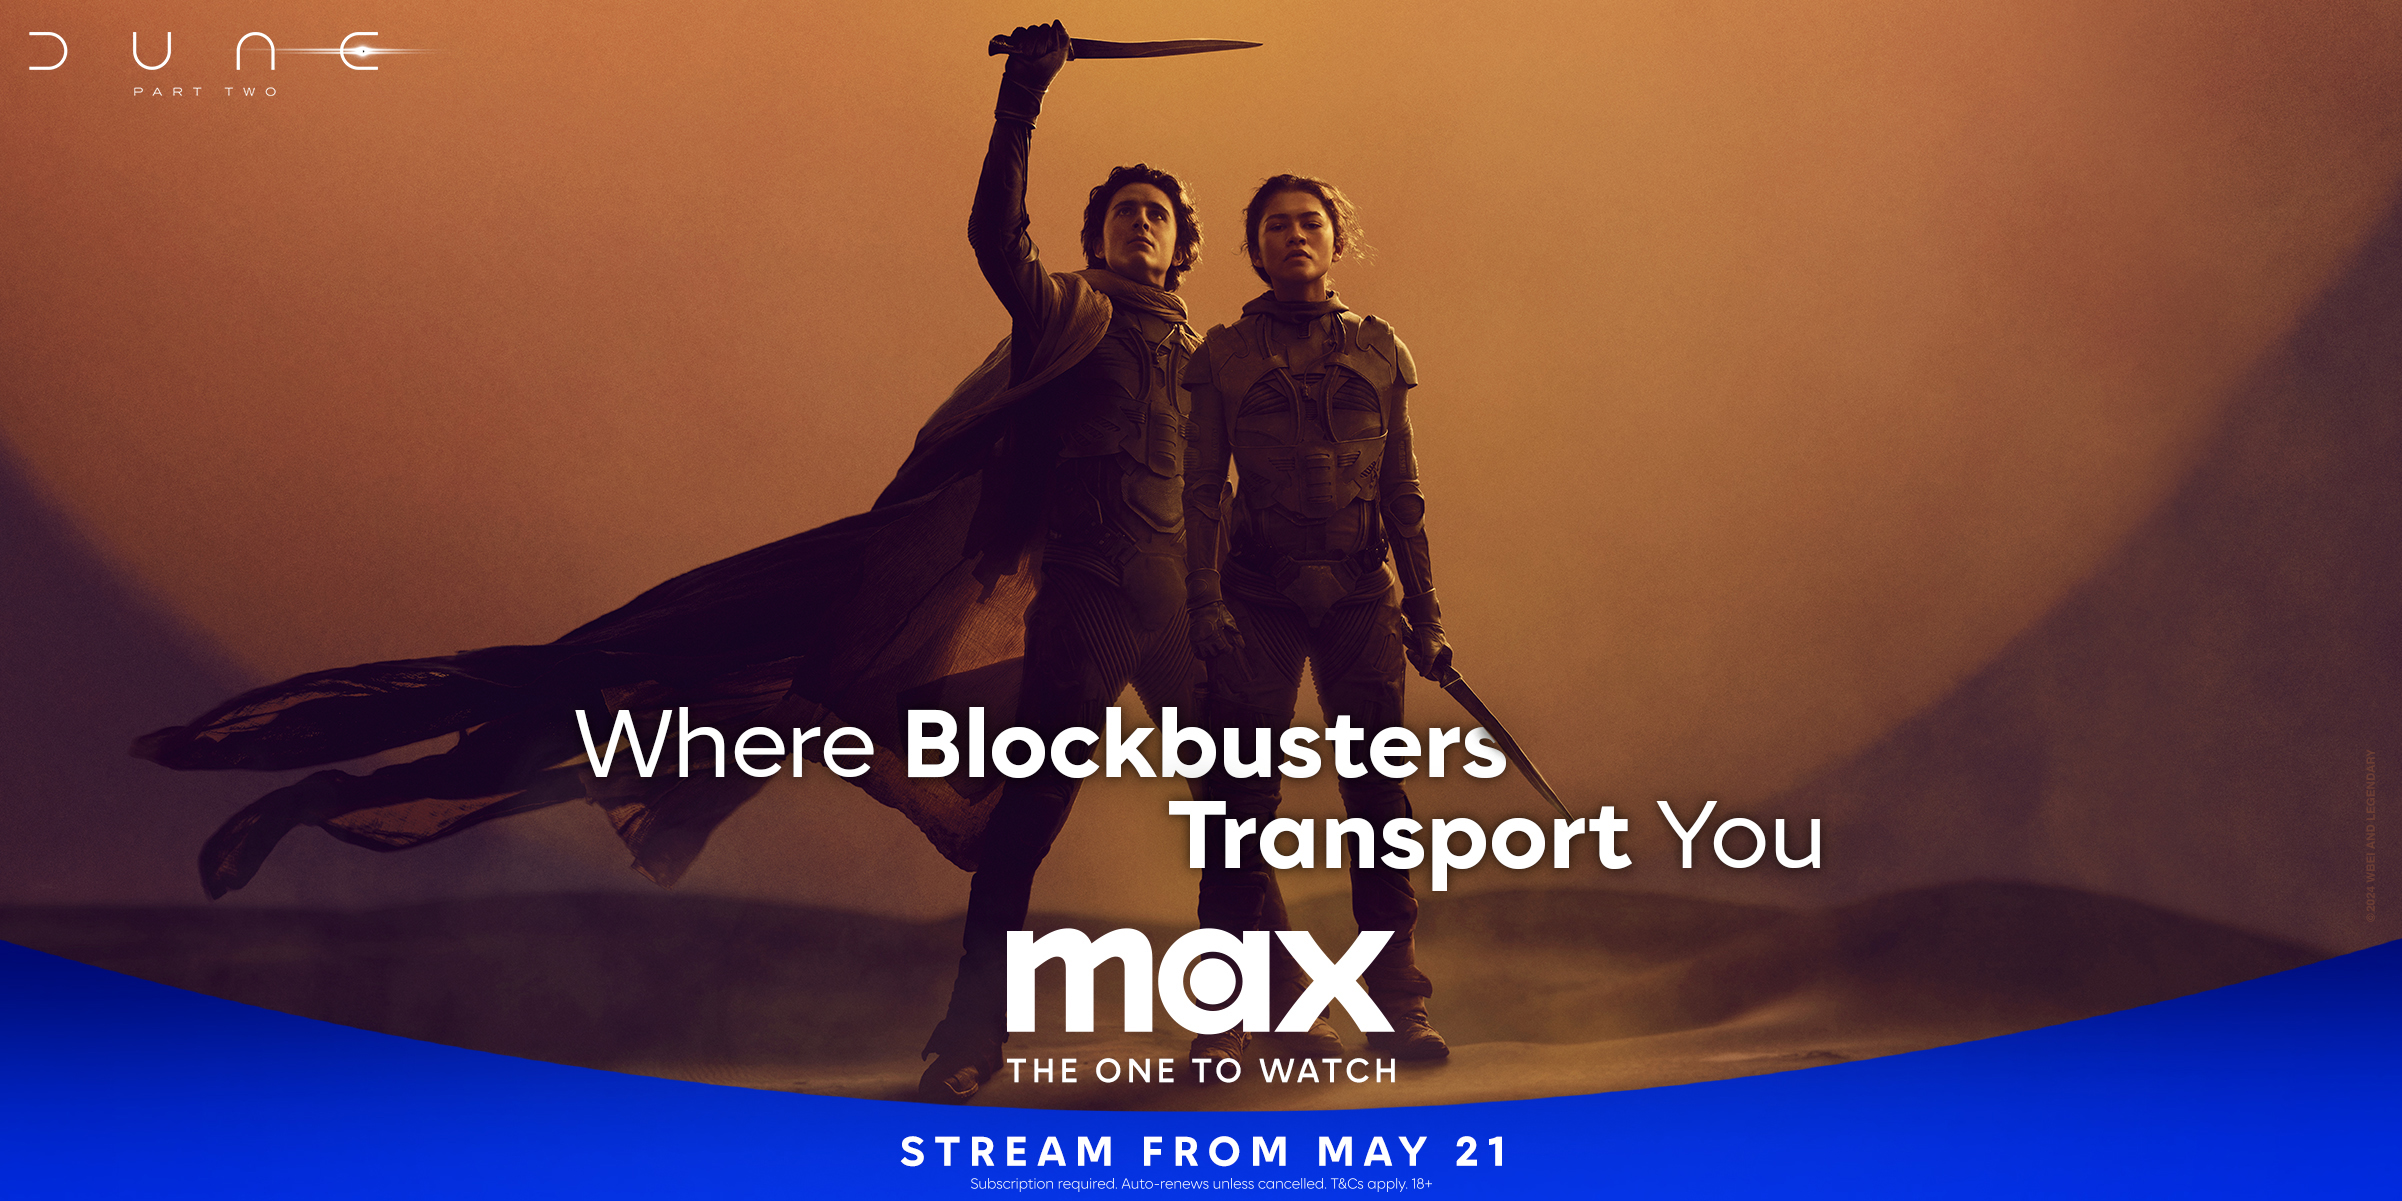 Warner Bros. Discovery, Max, streaming service, European launch, content diversity, immersive experience, entertainment, marketing campaign, digital advertising, TV spot, out-of-home, digital creative, localised campaign, Europe, Iberia, Nordics, Central and Eastern Europe.